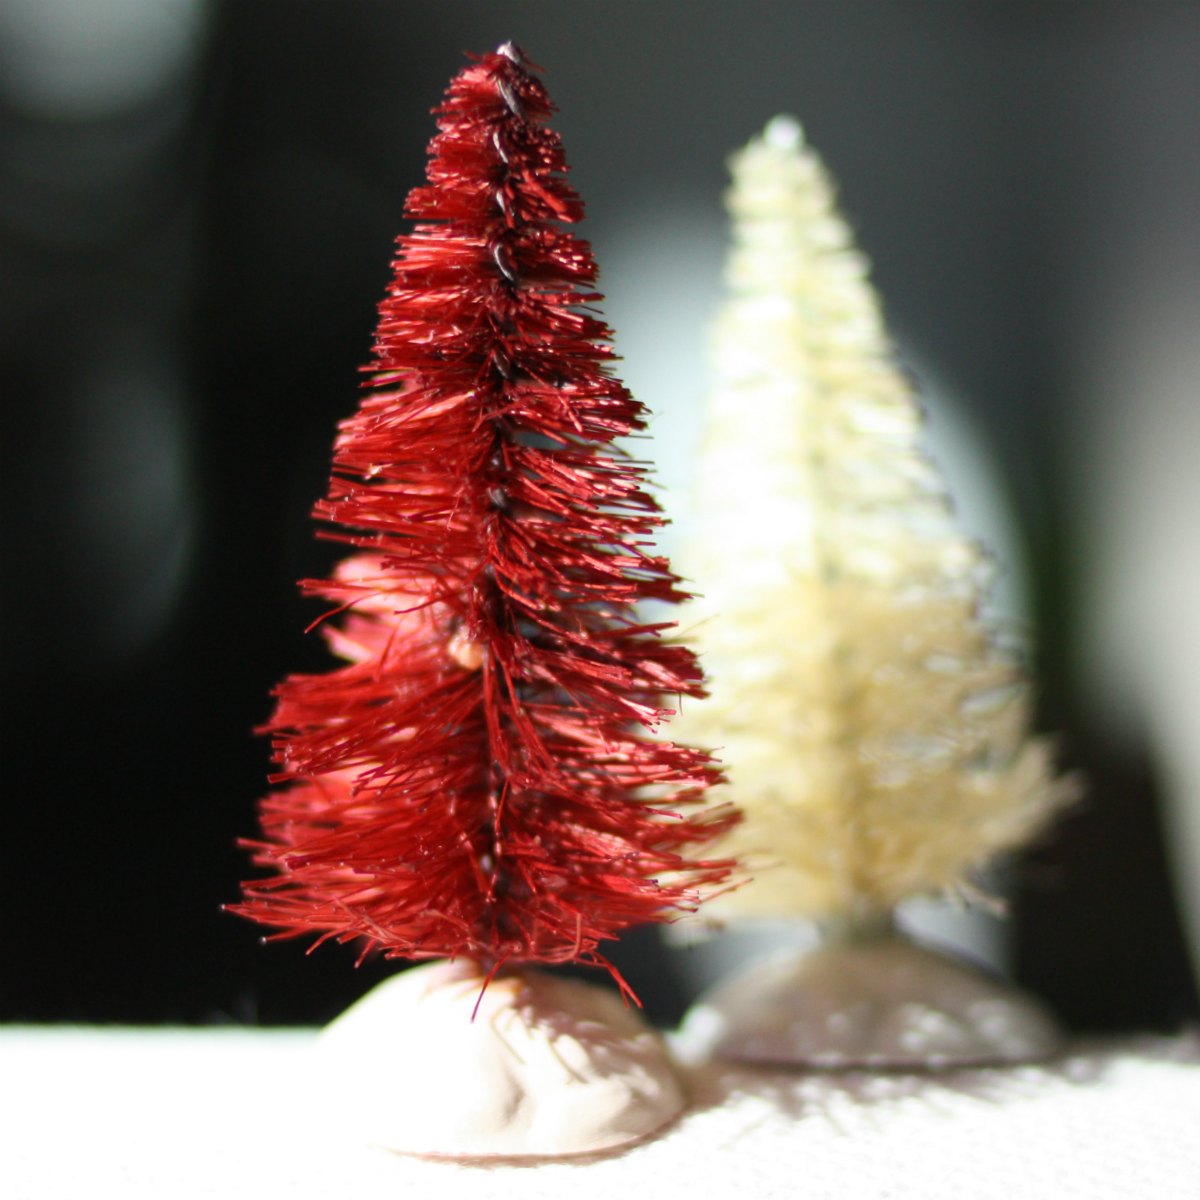 Red and white dyed bottle brush trees for Christmas